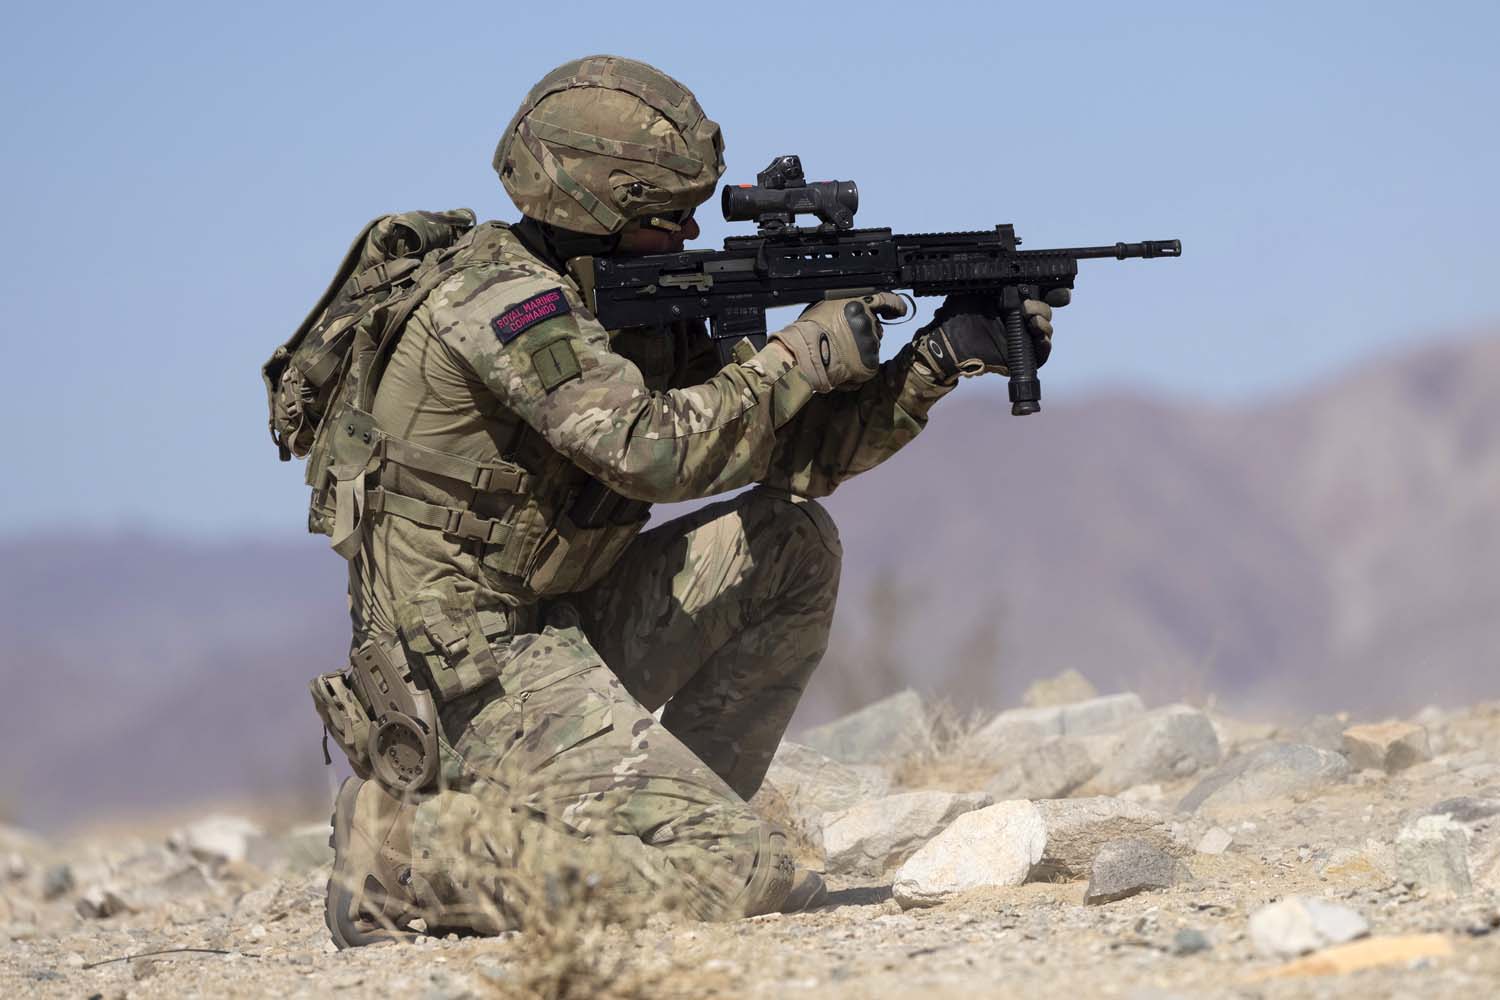 A Royal Marines Commando in action in the Mojave Desert 